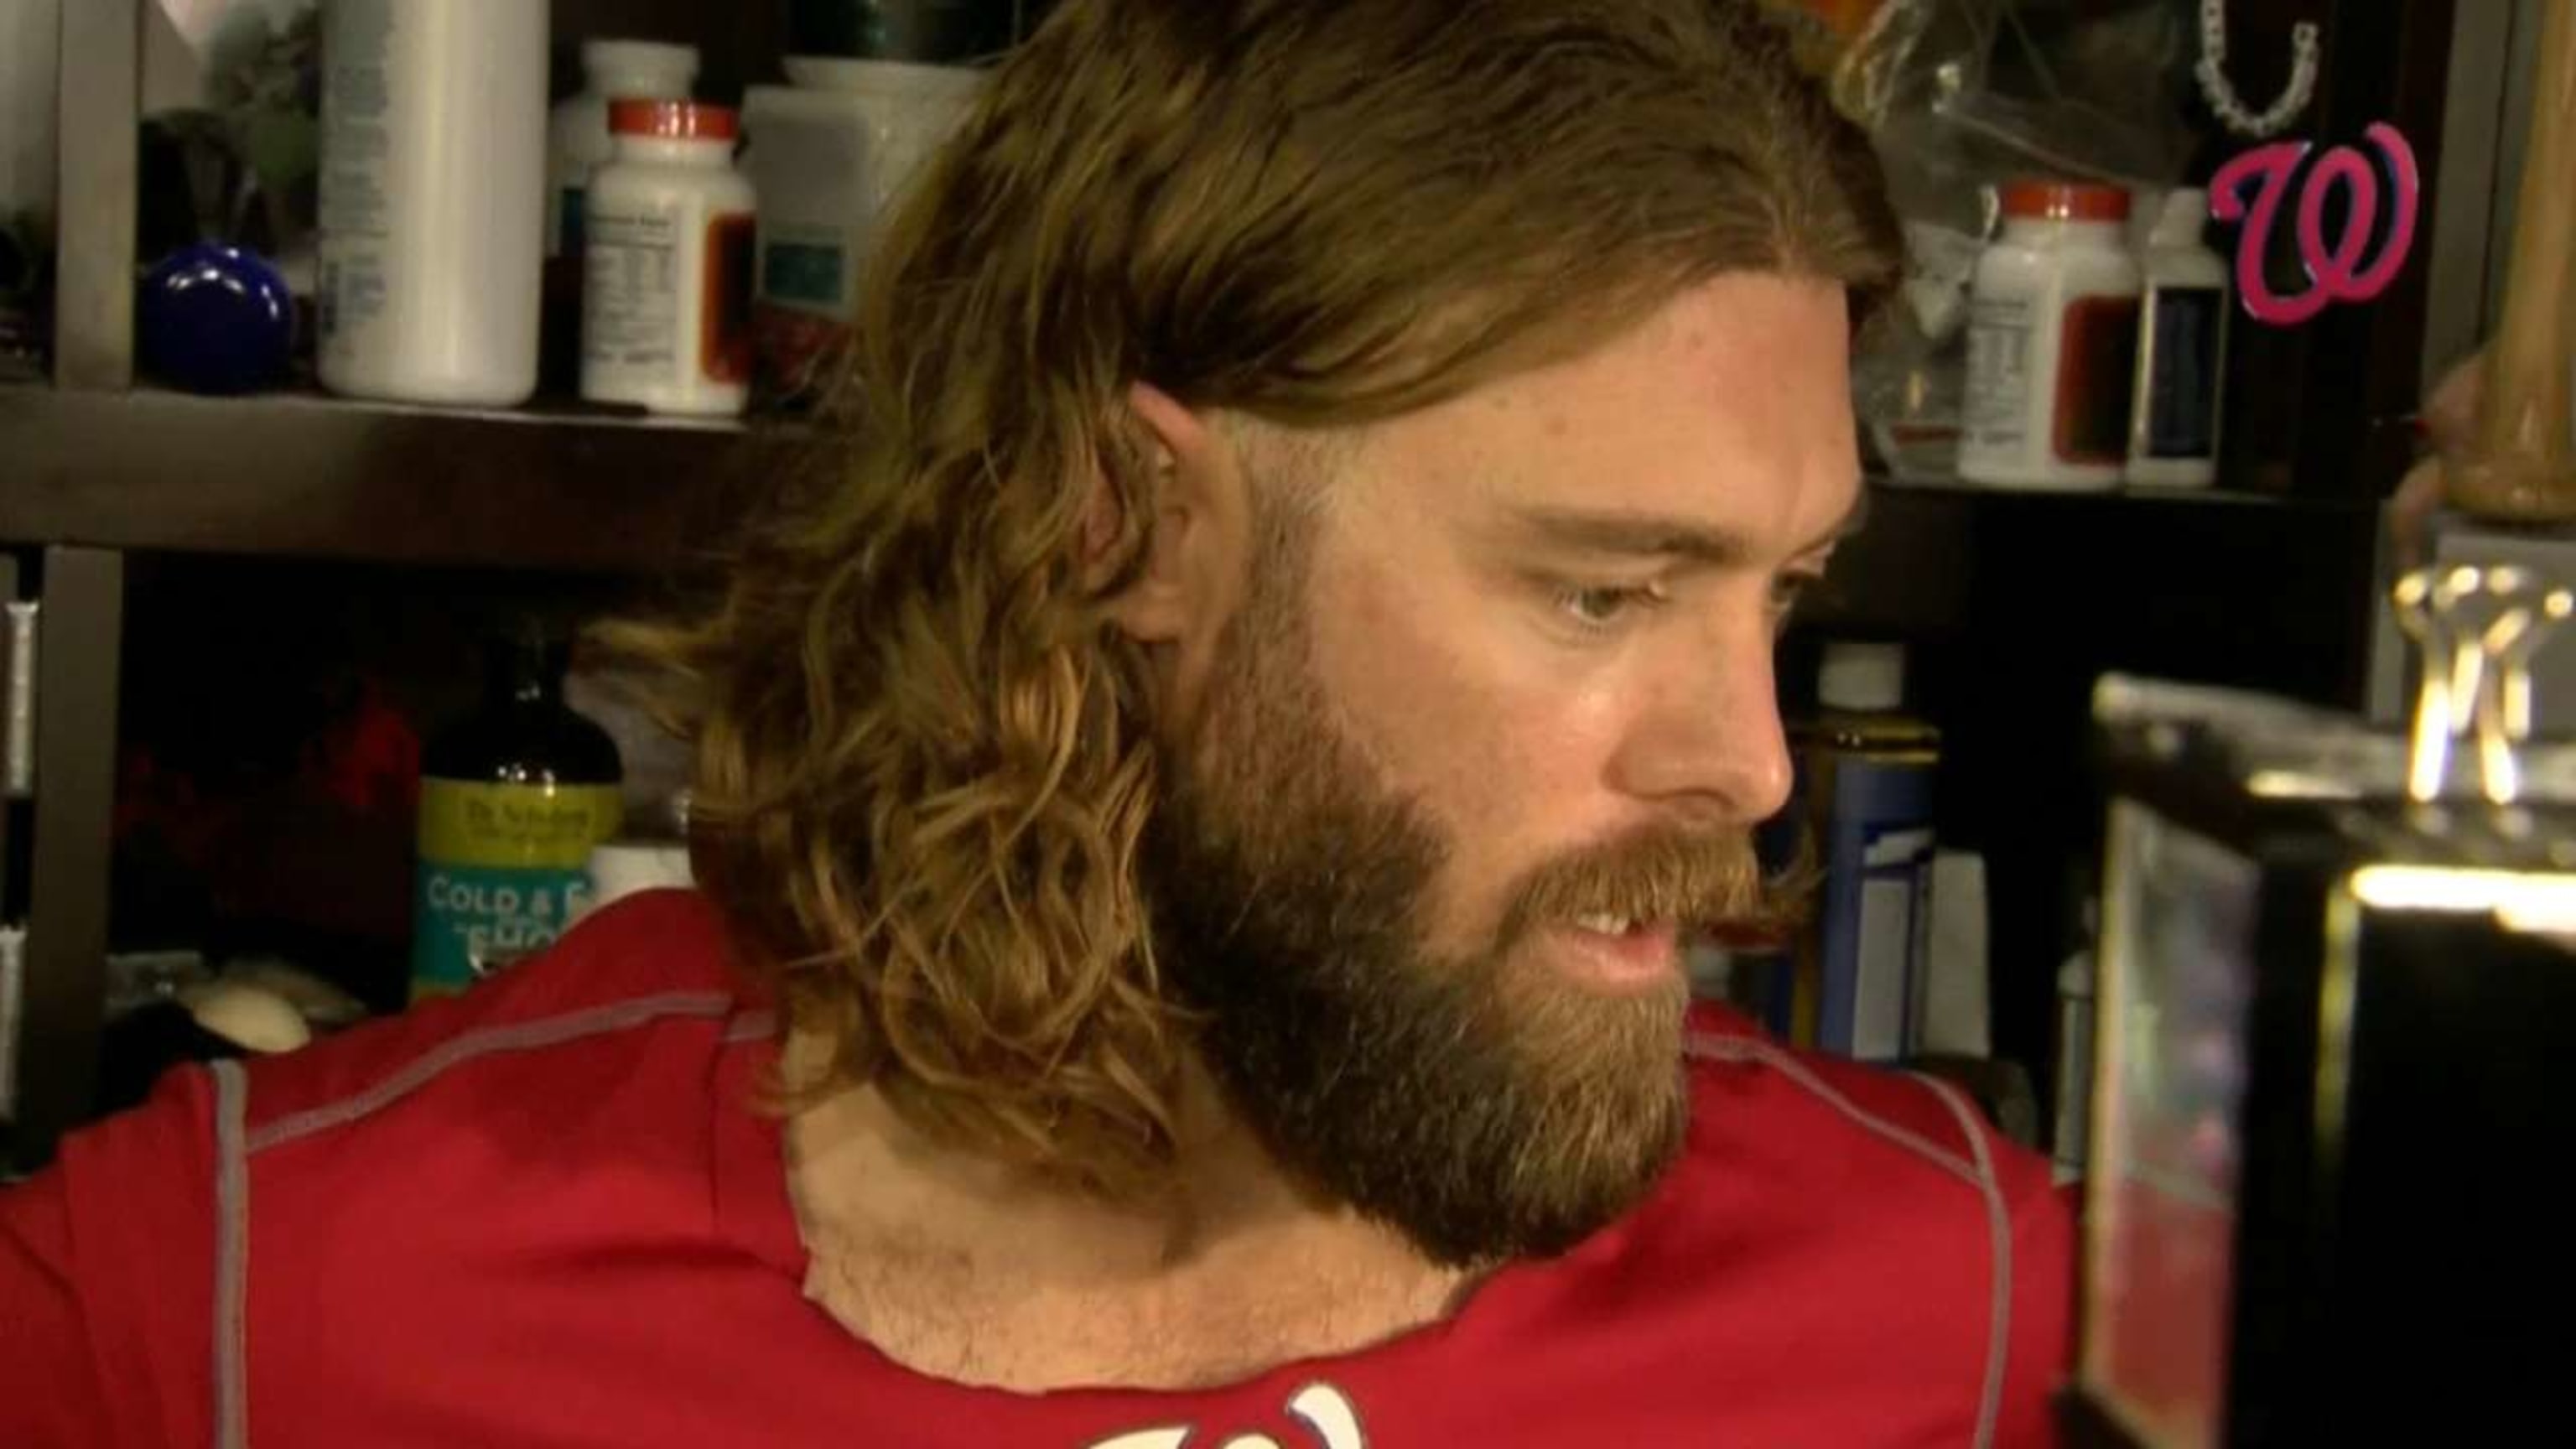 Jayson Werth thrown out at home by Dodgers